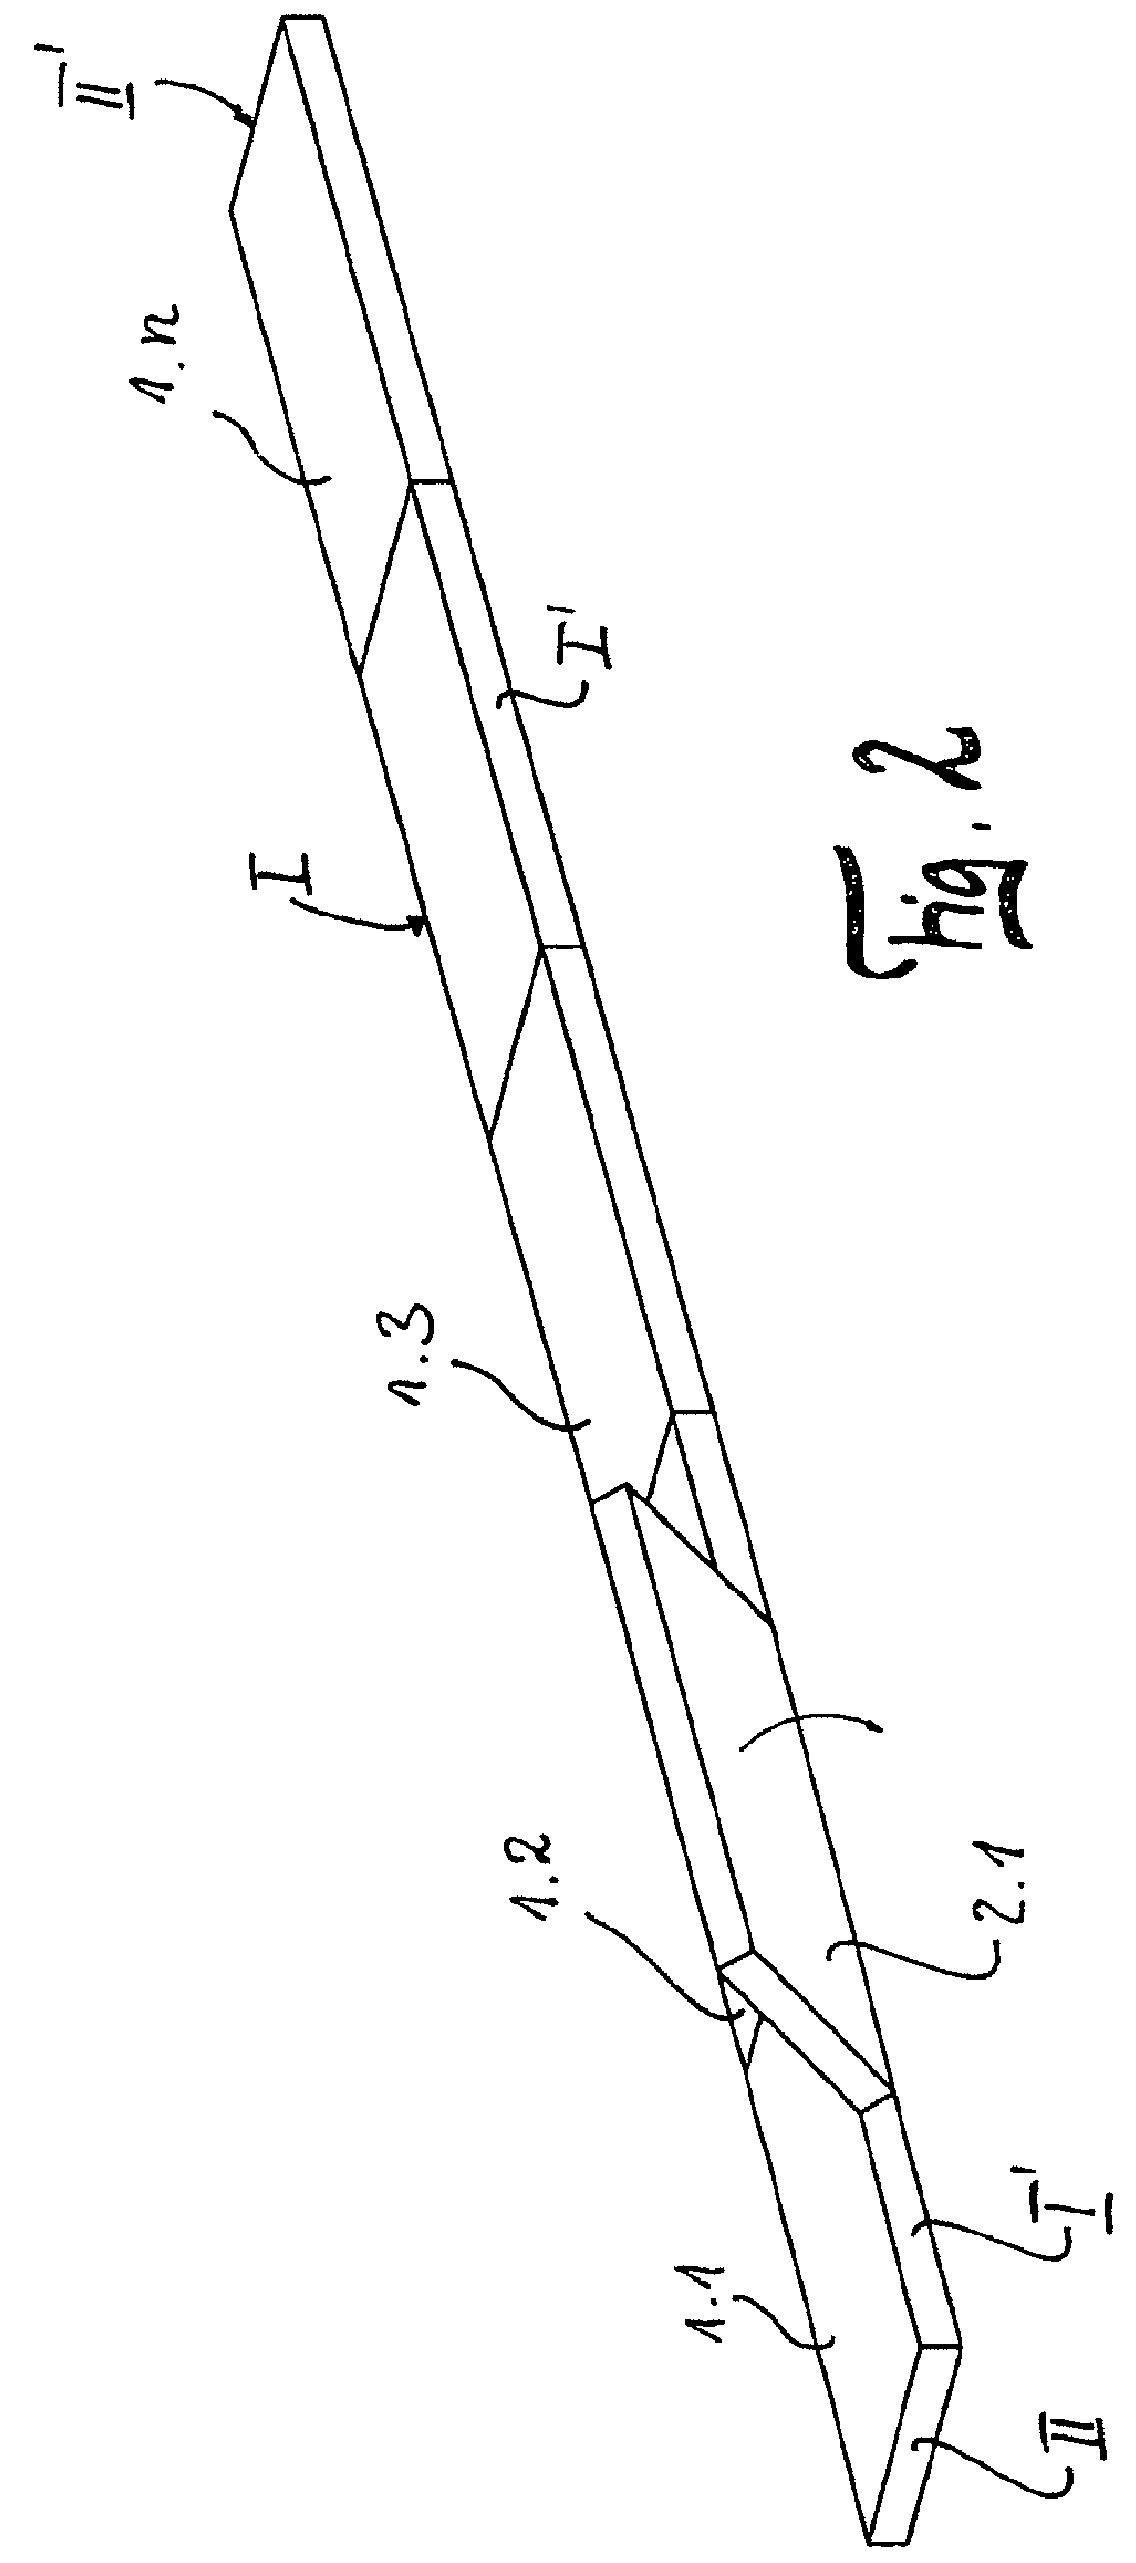 Method for laying floor panels